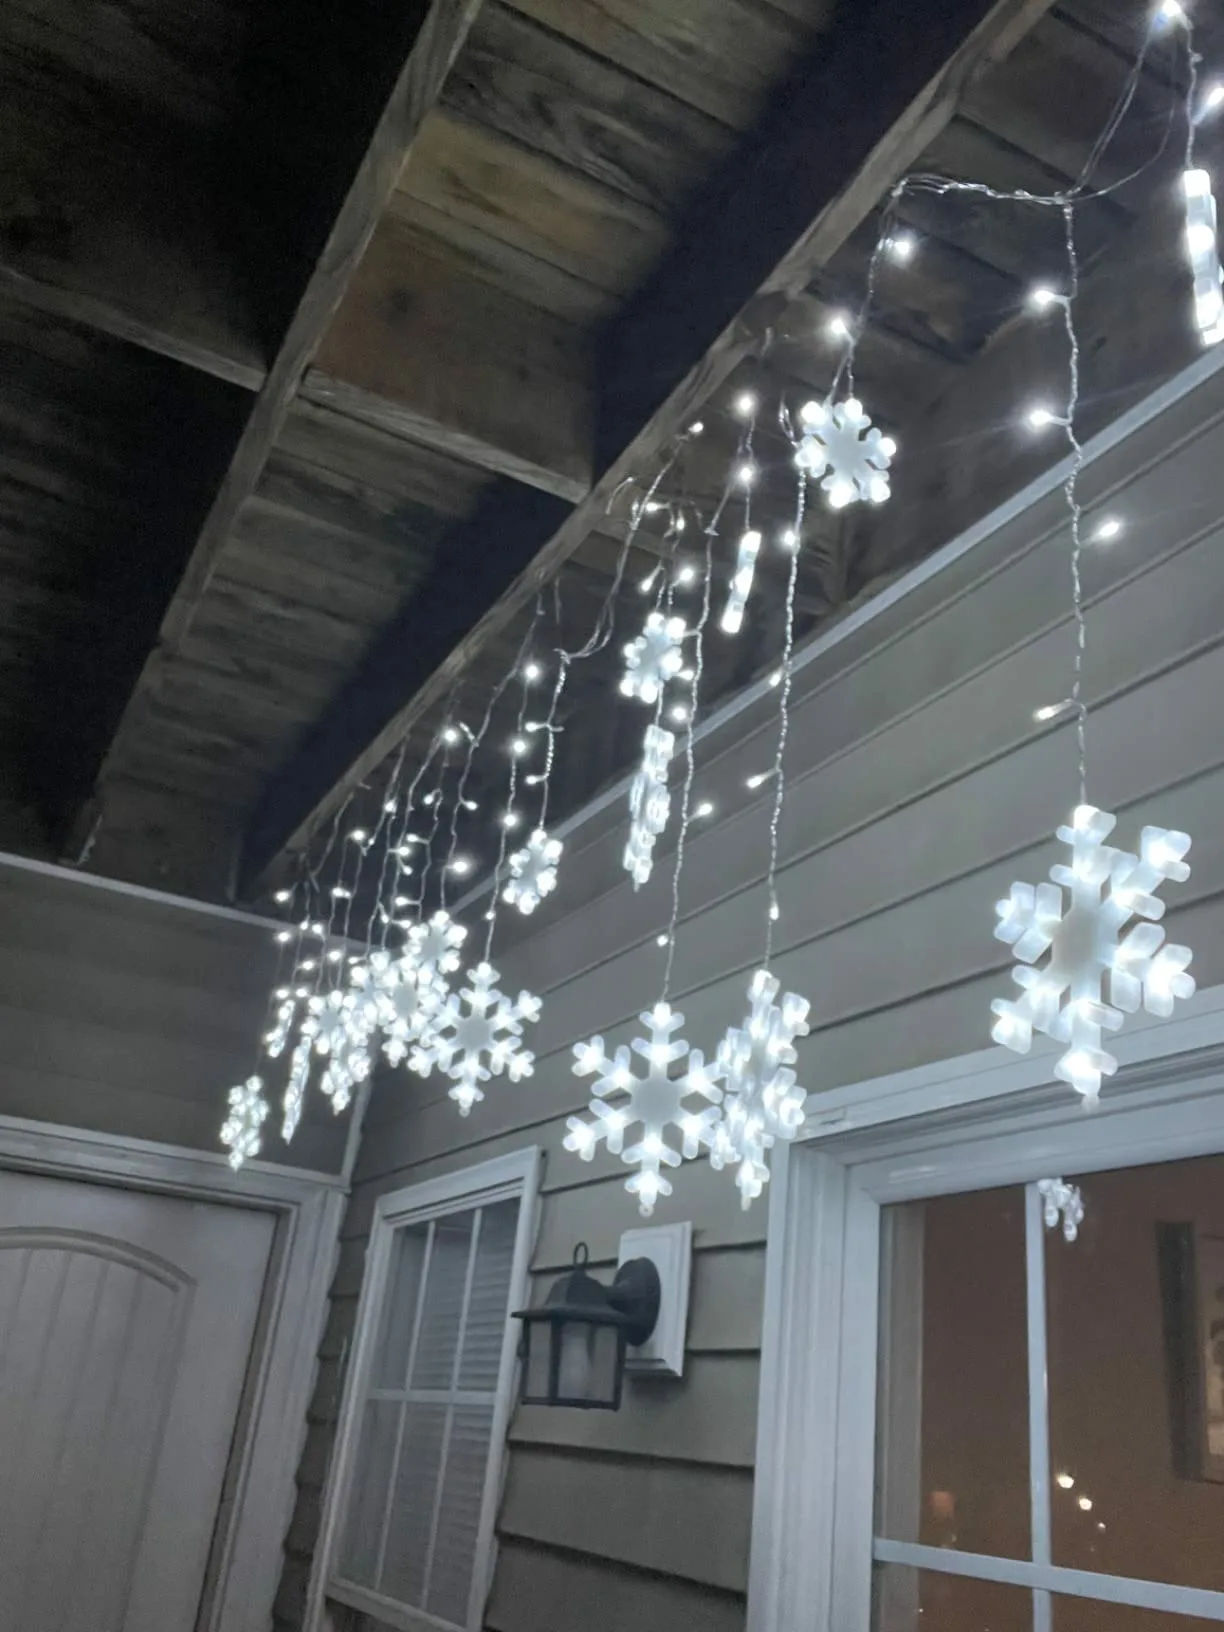 White Stringlights Hanging Wooden Ceiling Side Angle View Snowflake Christmas Lights